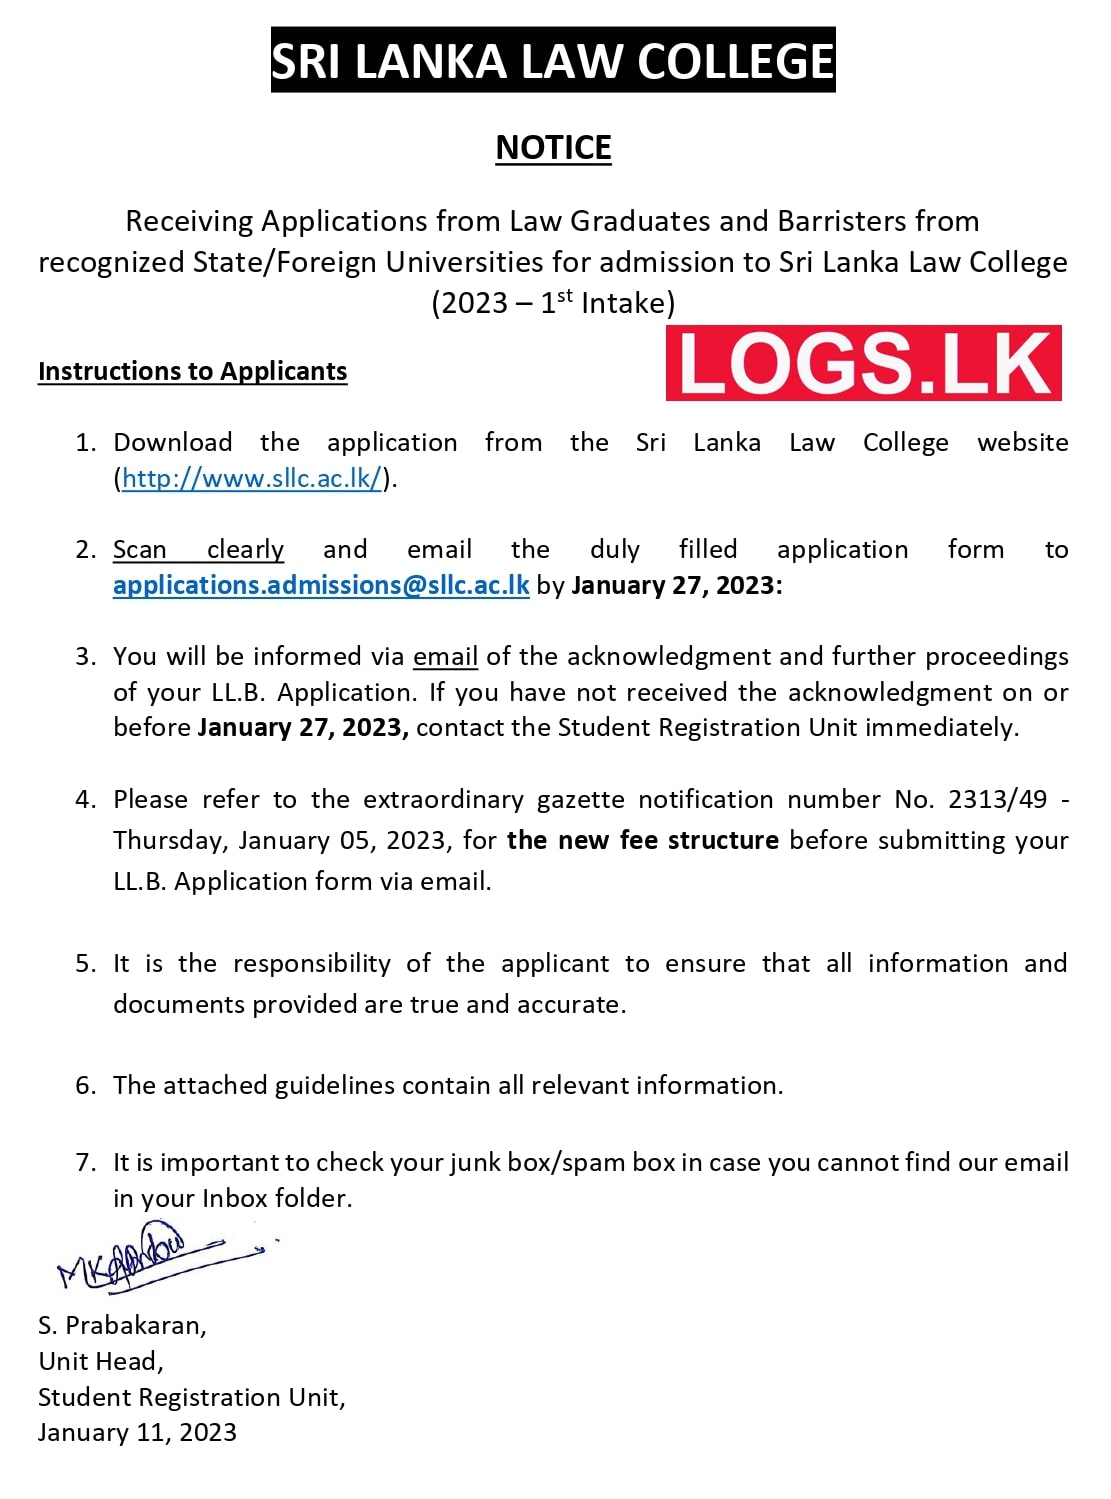 Law College Admission 2023 for Law Graduates and Barristers Application Form, Details Download